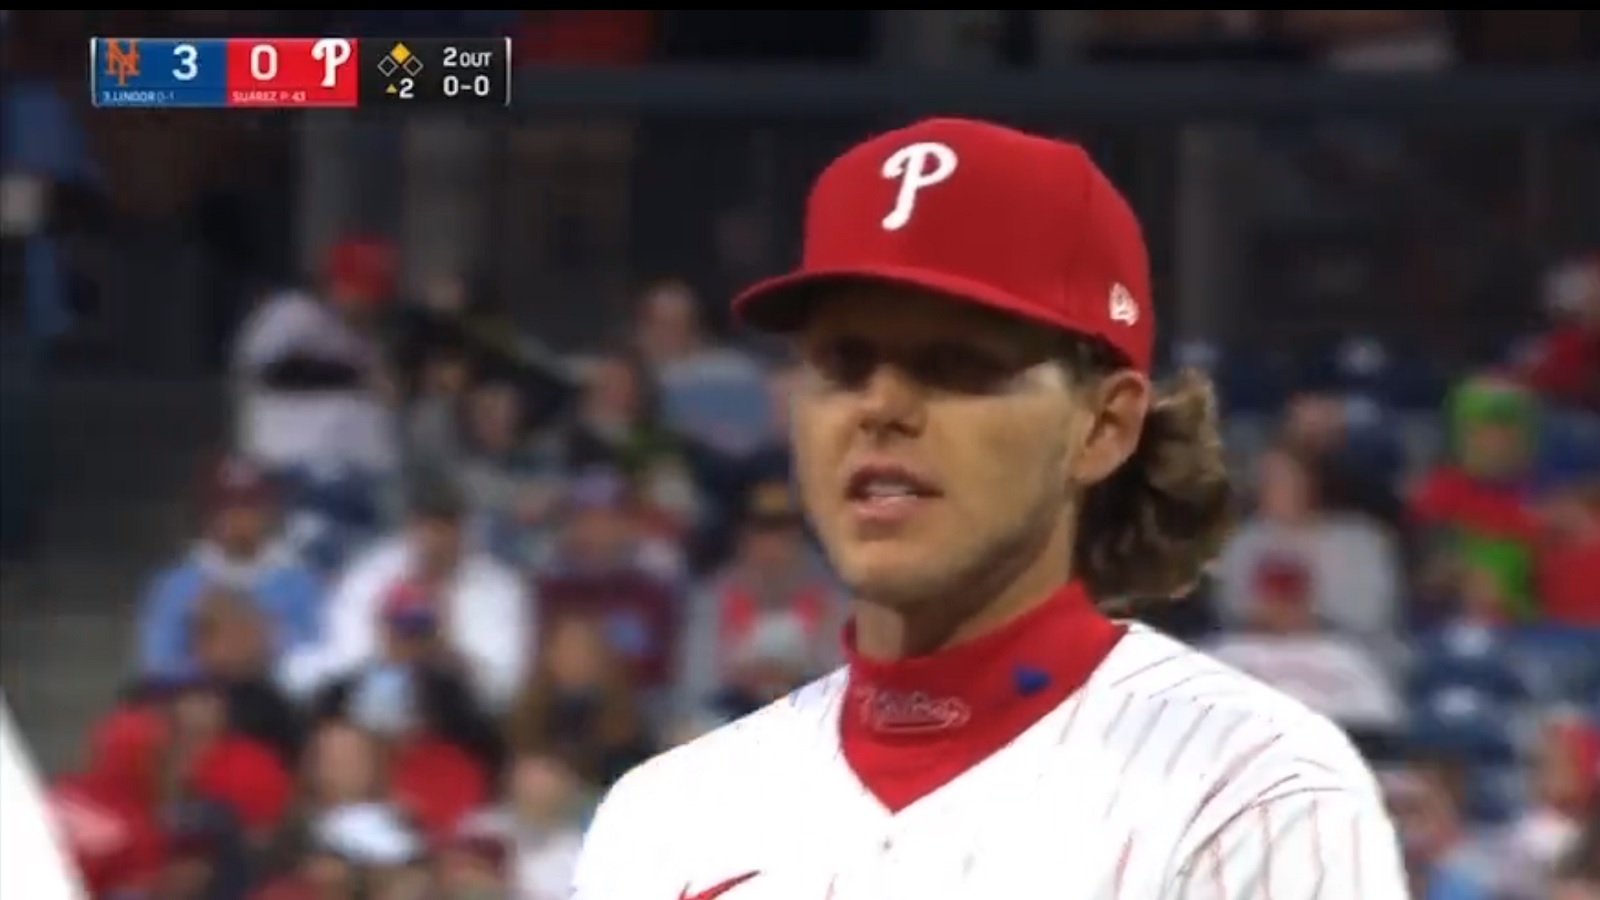 Alec Bohm seemed fed up with Phillies fans during brutal game